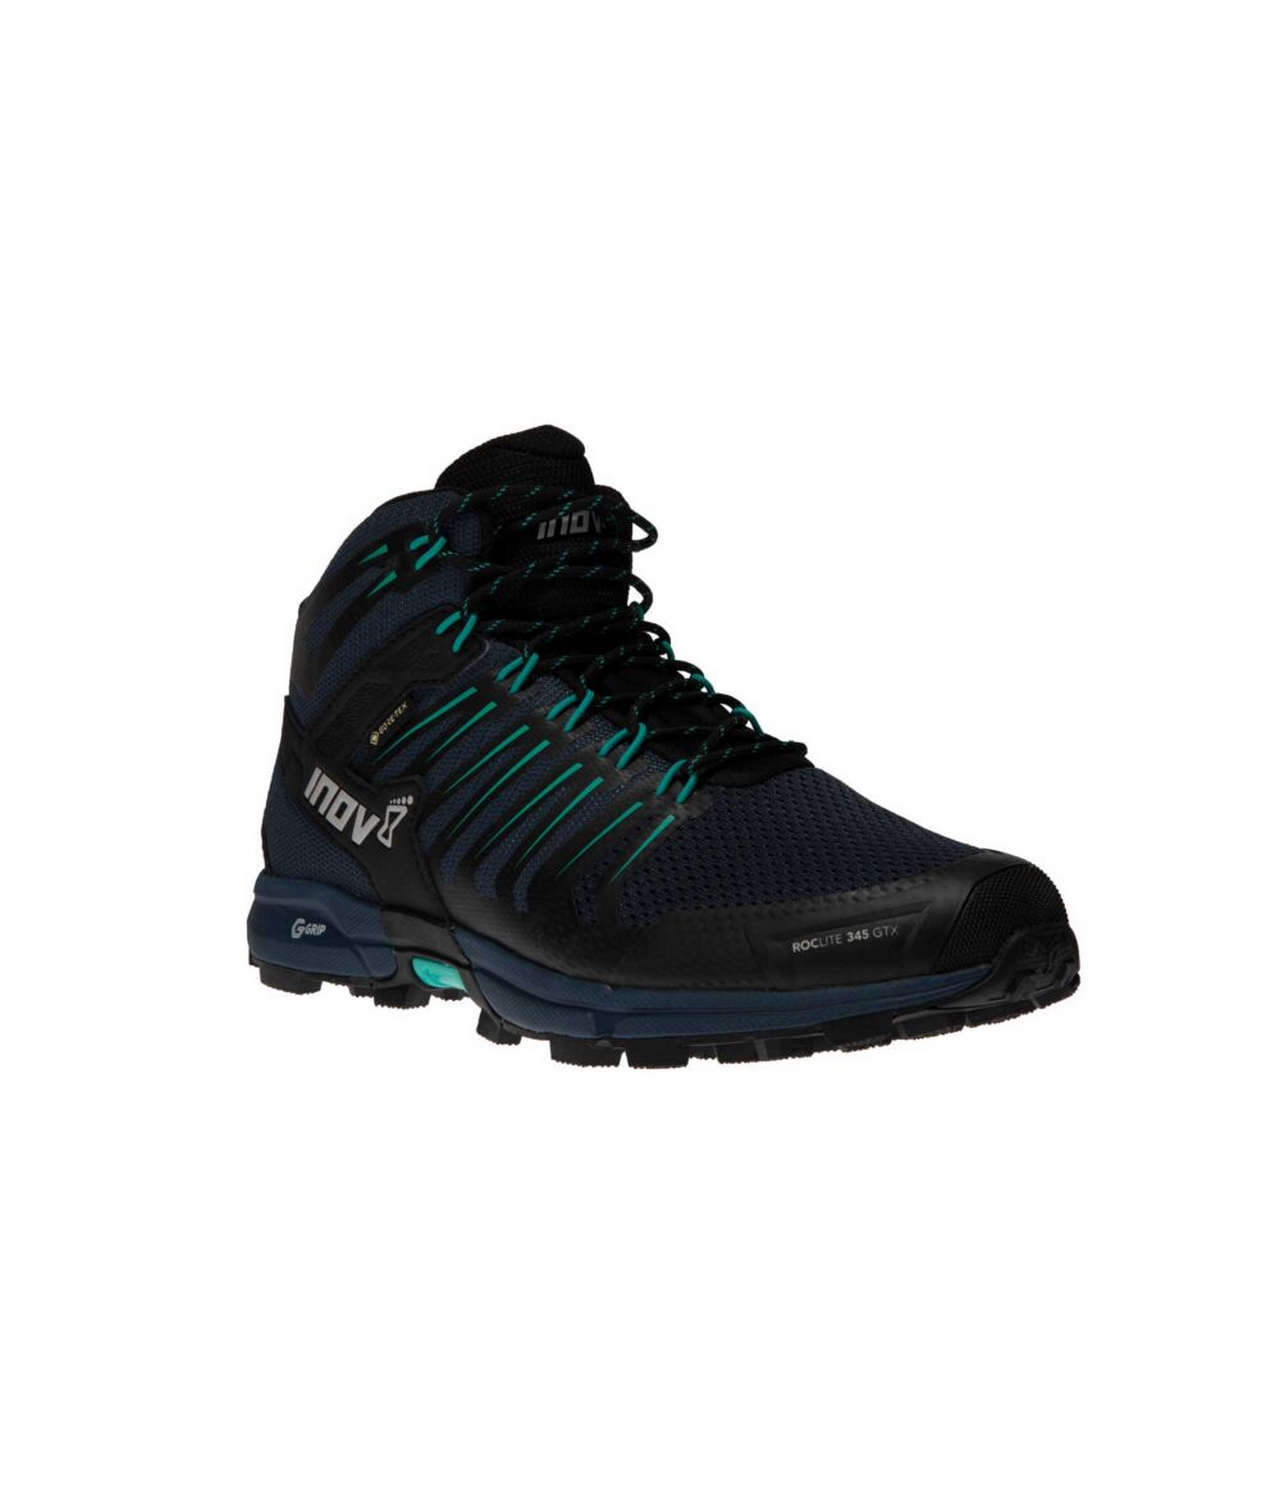 inov 8 roclite g 345 gtx w navy teal hike mid boot fast and light 7